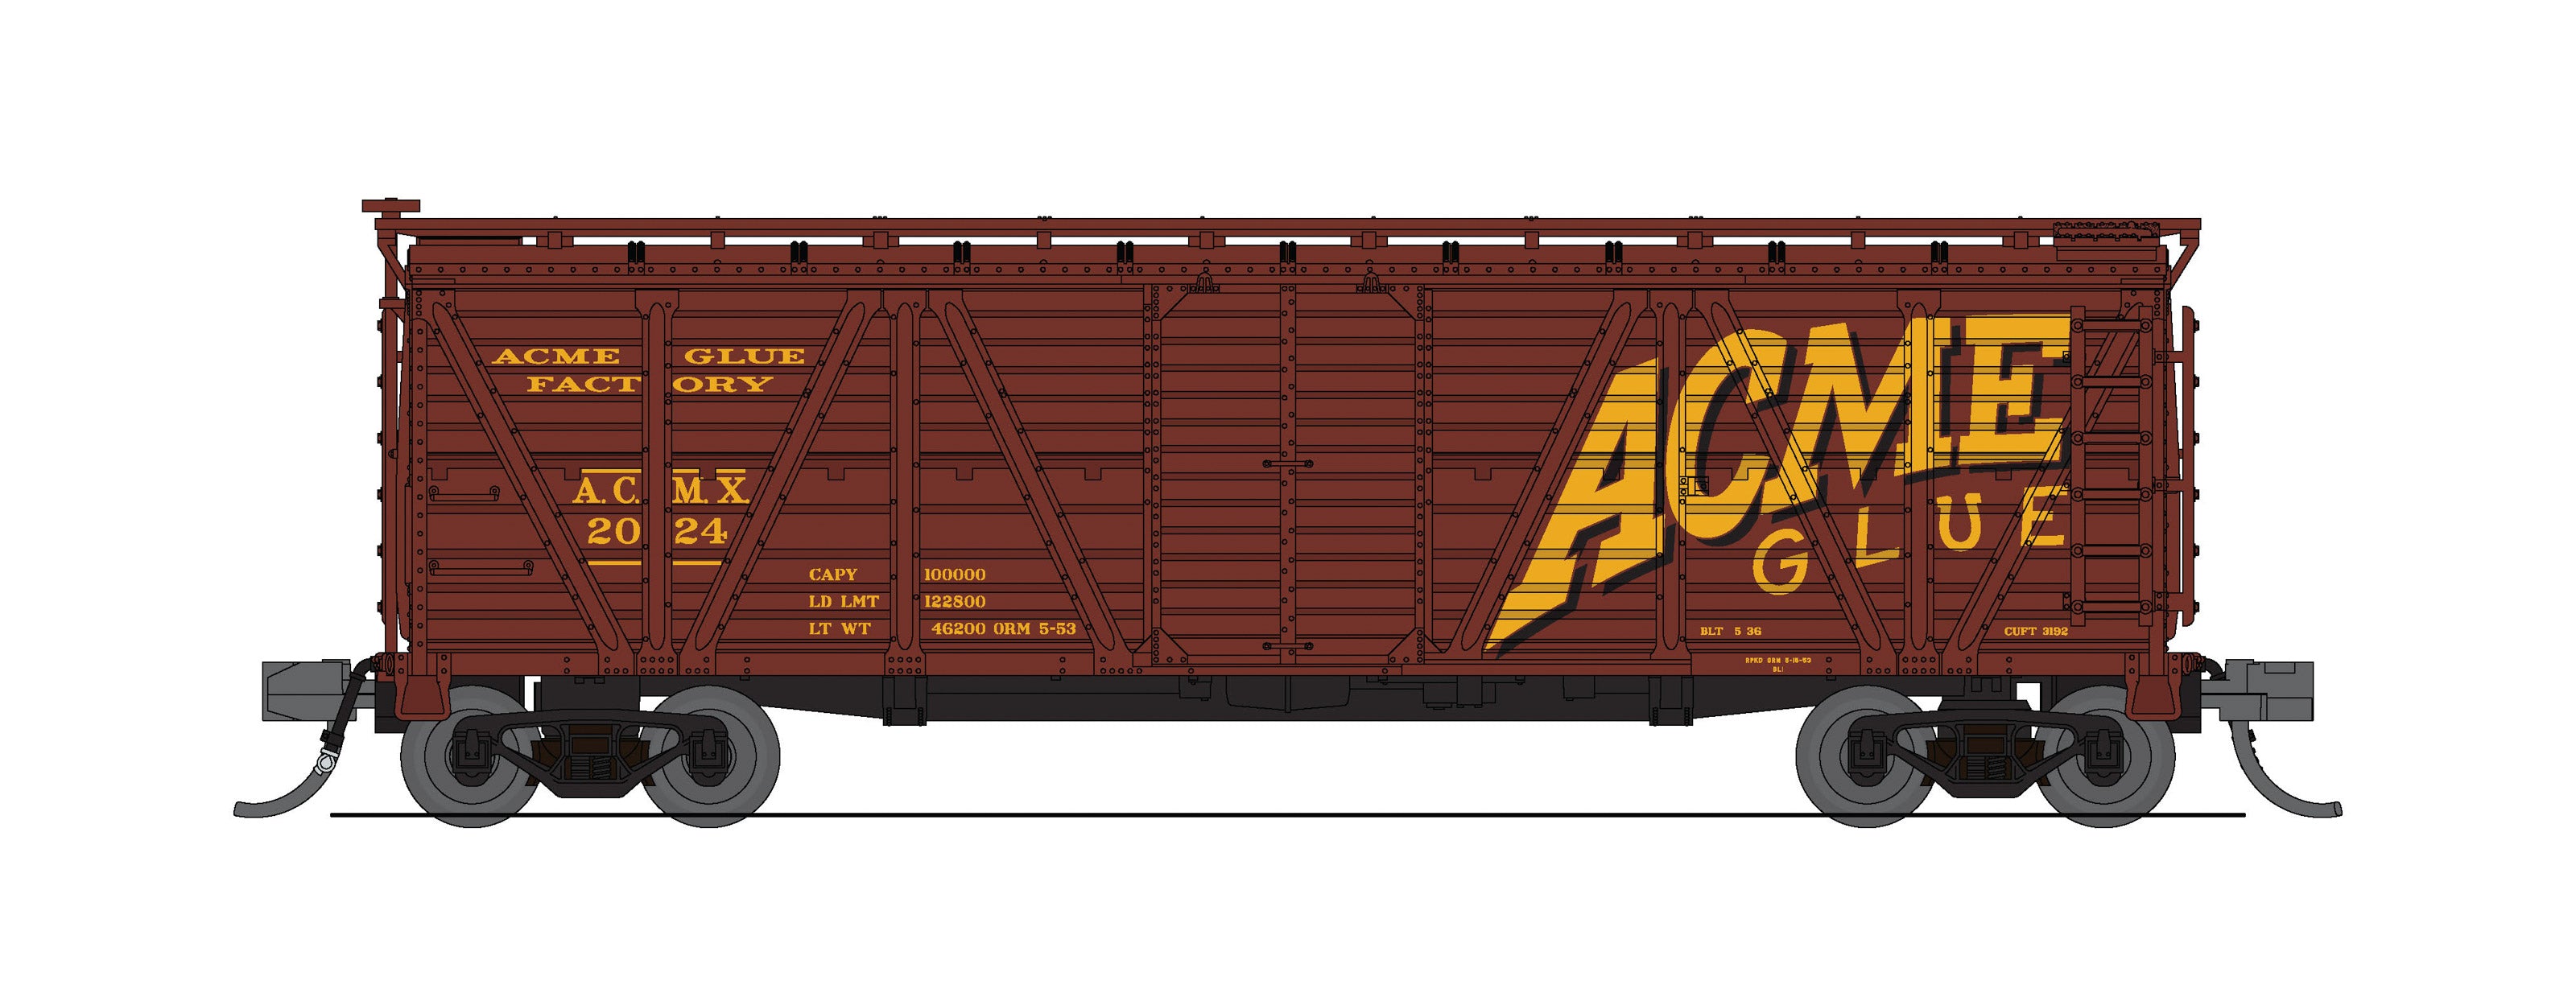 8487 40' Wood Stock Car,  Acme Glue Factory, No Sound, 2-pack, N Scale